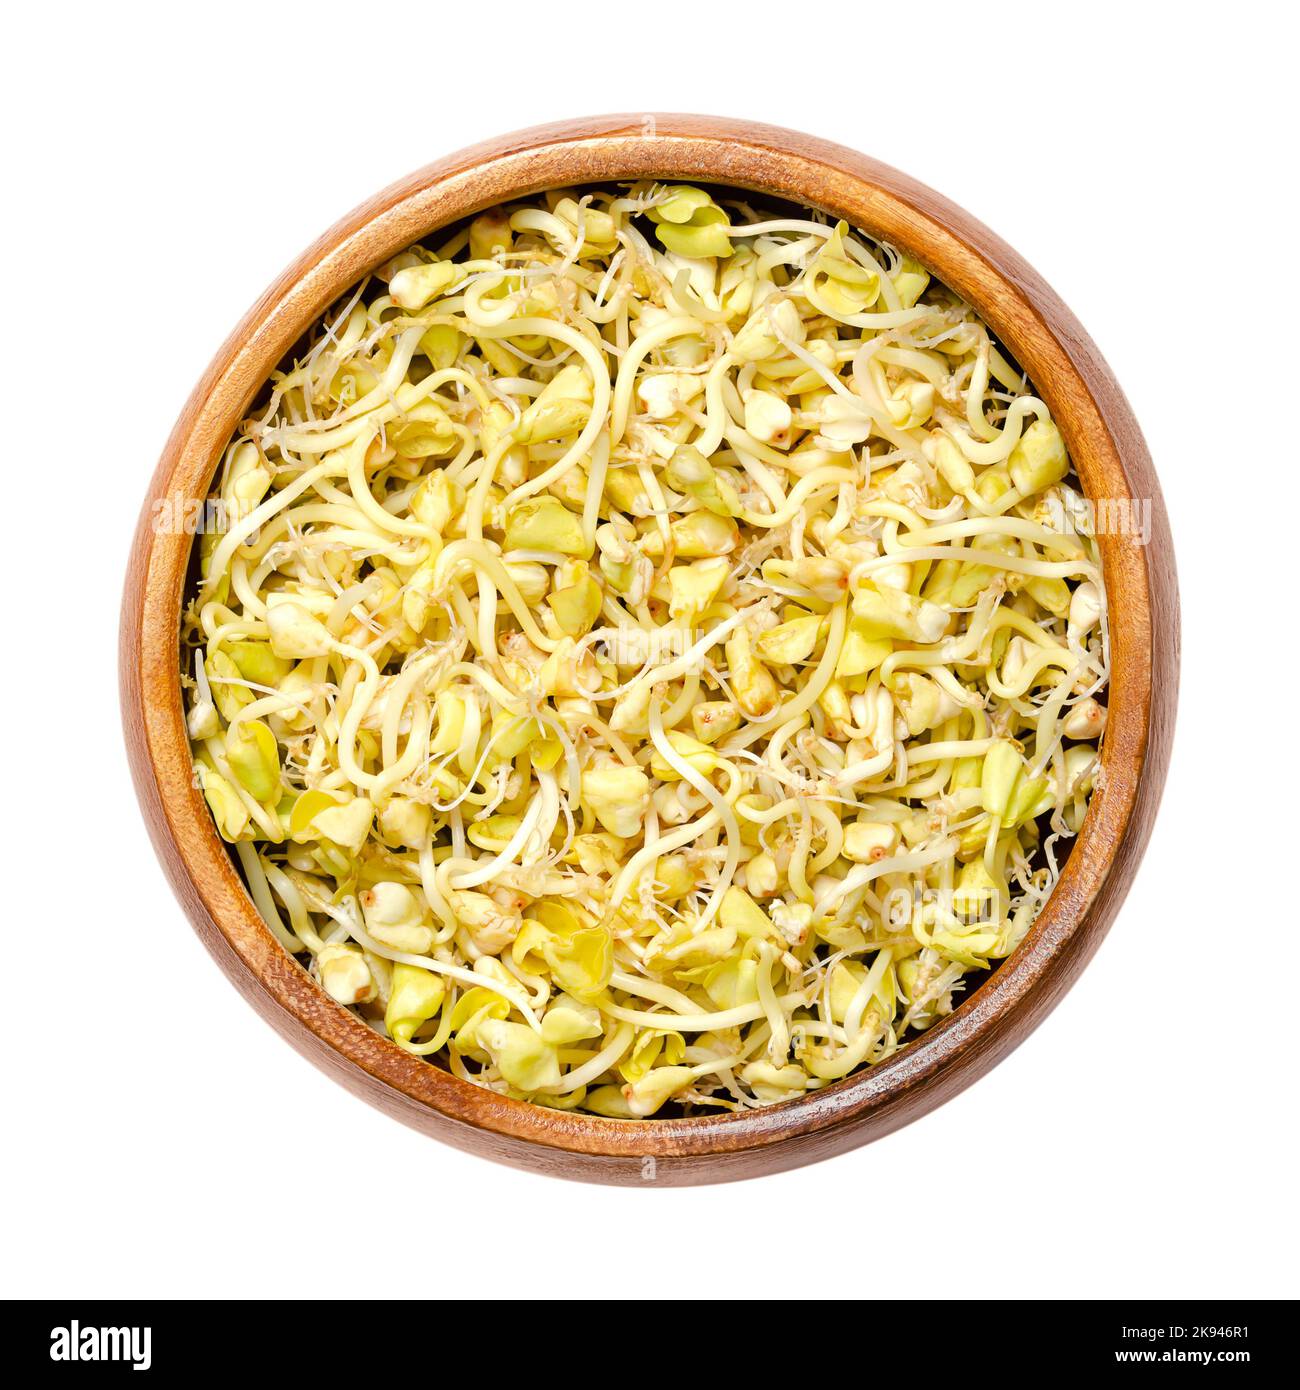 Fresh buckwheat sprouts in a wooden bowl. Sprouted hulled common buckwheat seeds, Fagopyrum esculentum, with cotyledons and small roots. Stock Photo